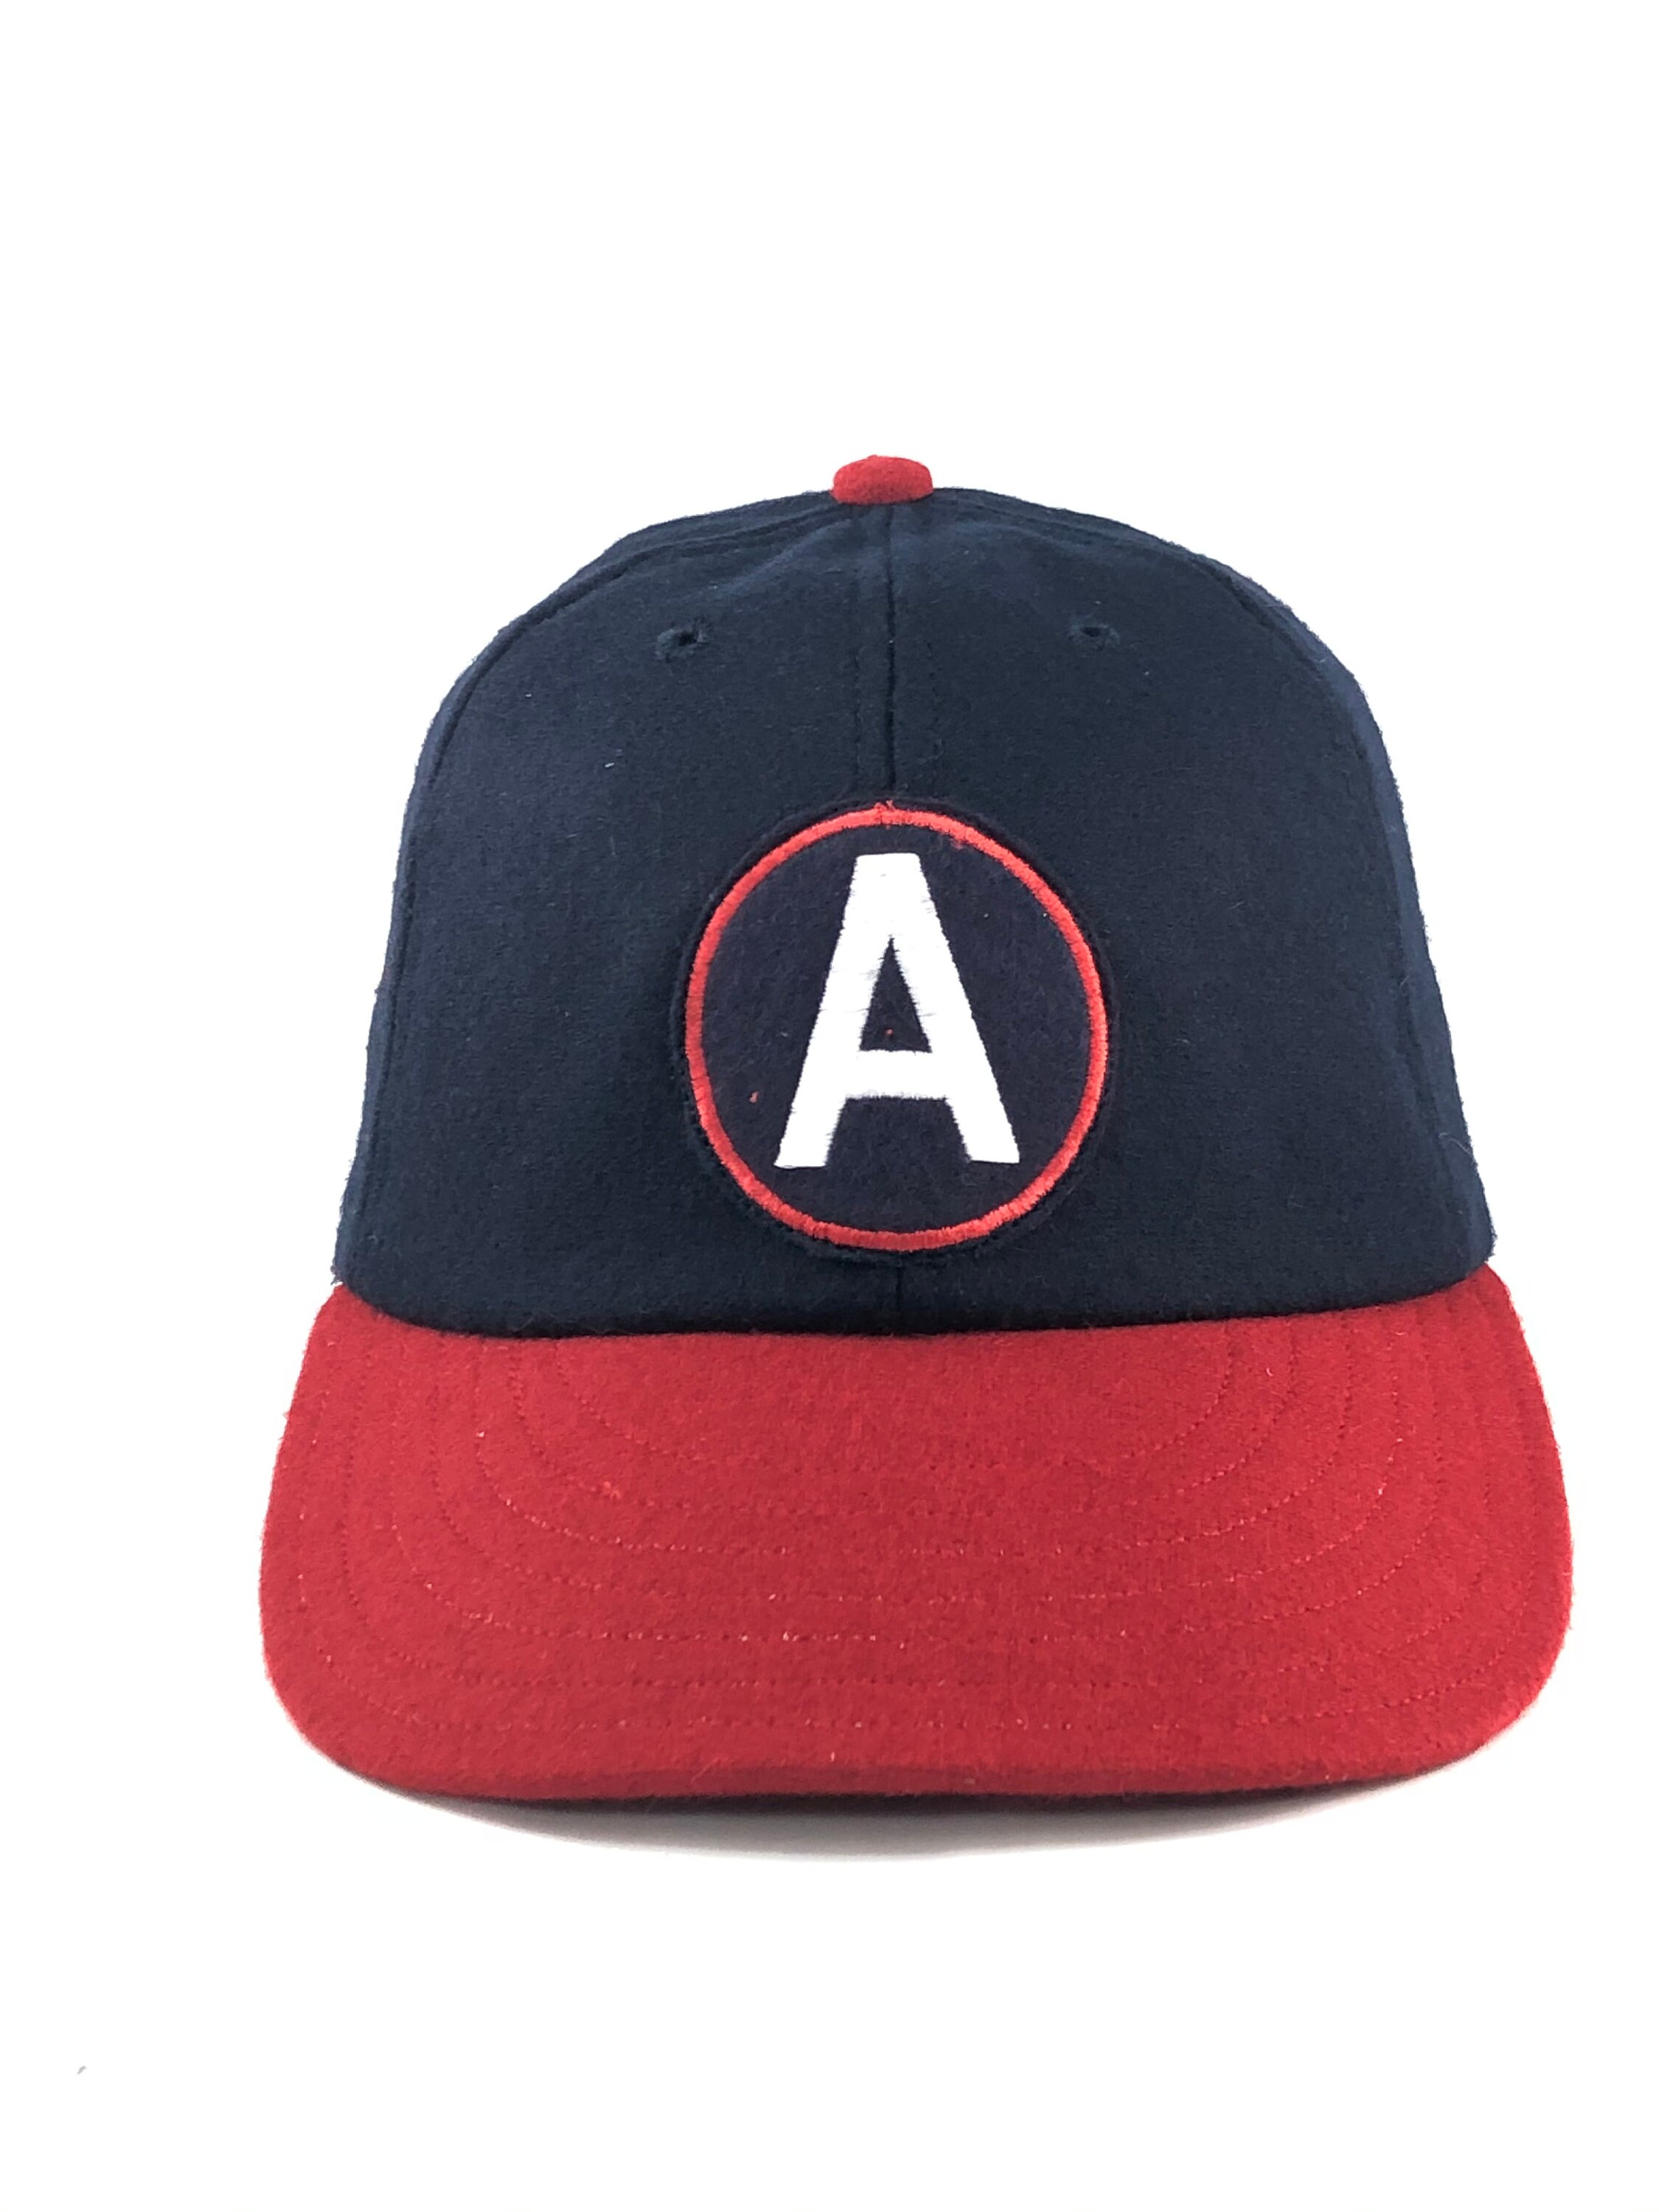 ANY Letter on Felt Letter Patch sewn on navy and red melton wool cap ...